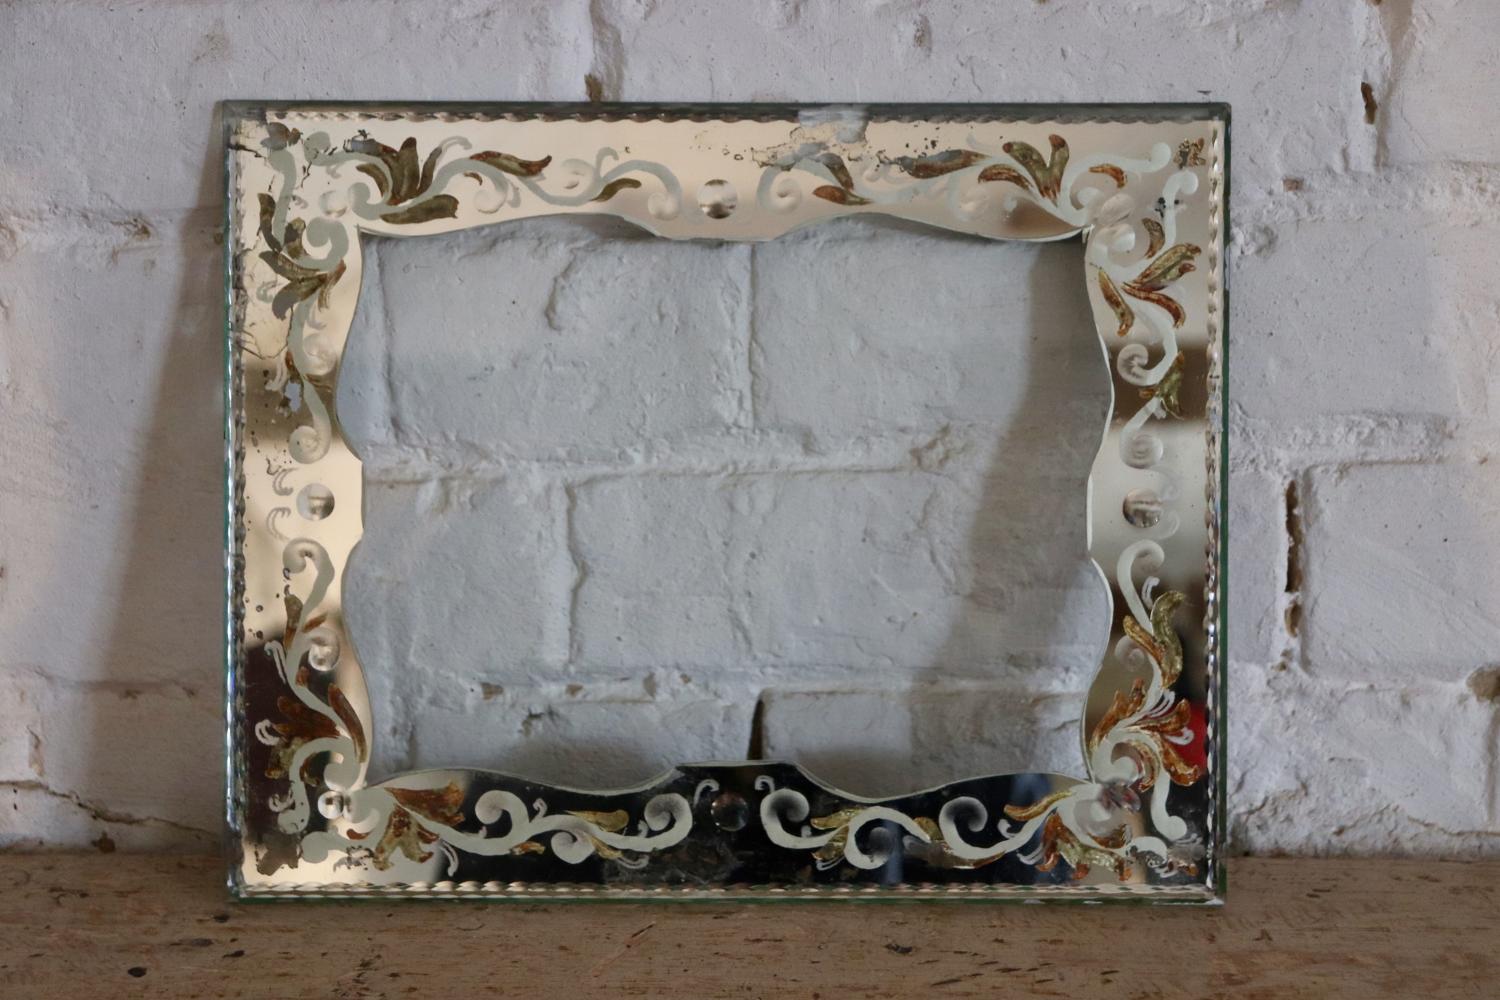 Vintage glass frame with painted mirrored edging